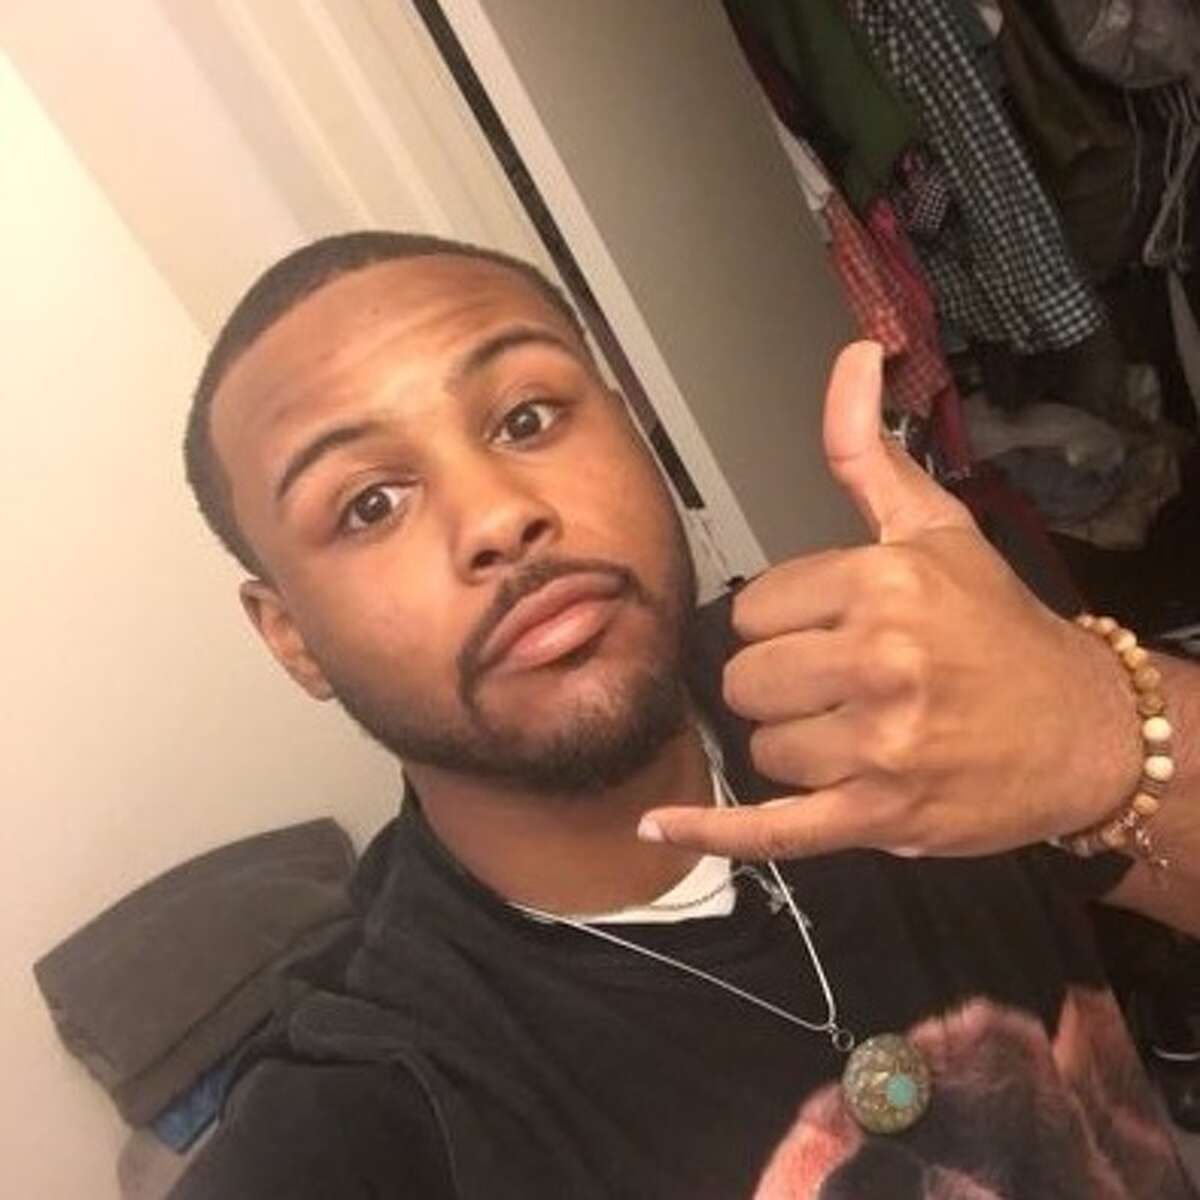 1. Kendrex White, seen in his Twitter profile photo above, was a biology junior at the University of Texas at Austin, according to his account.